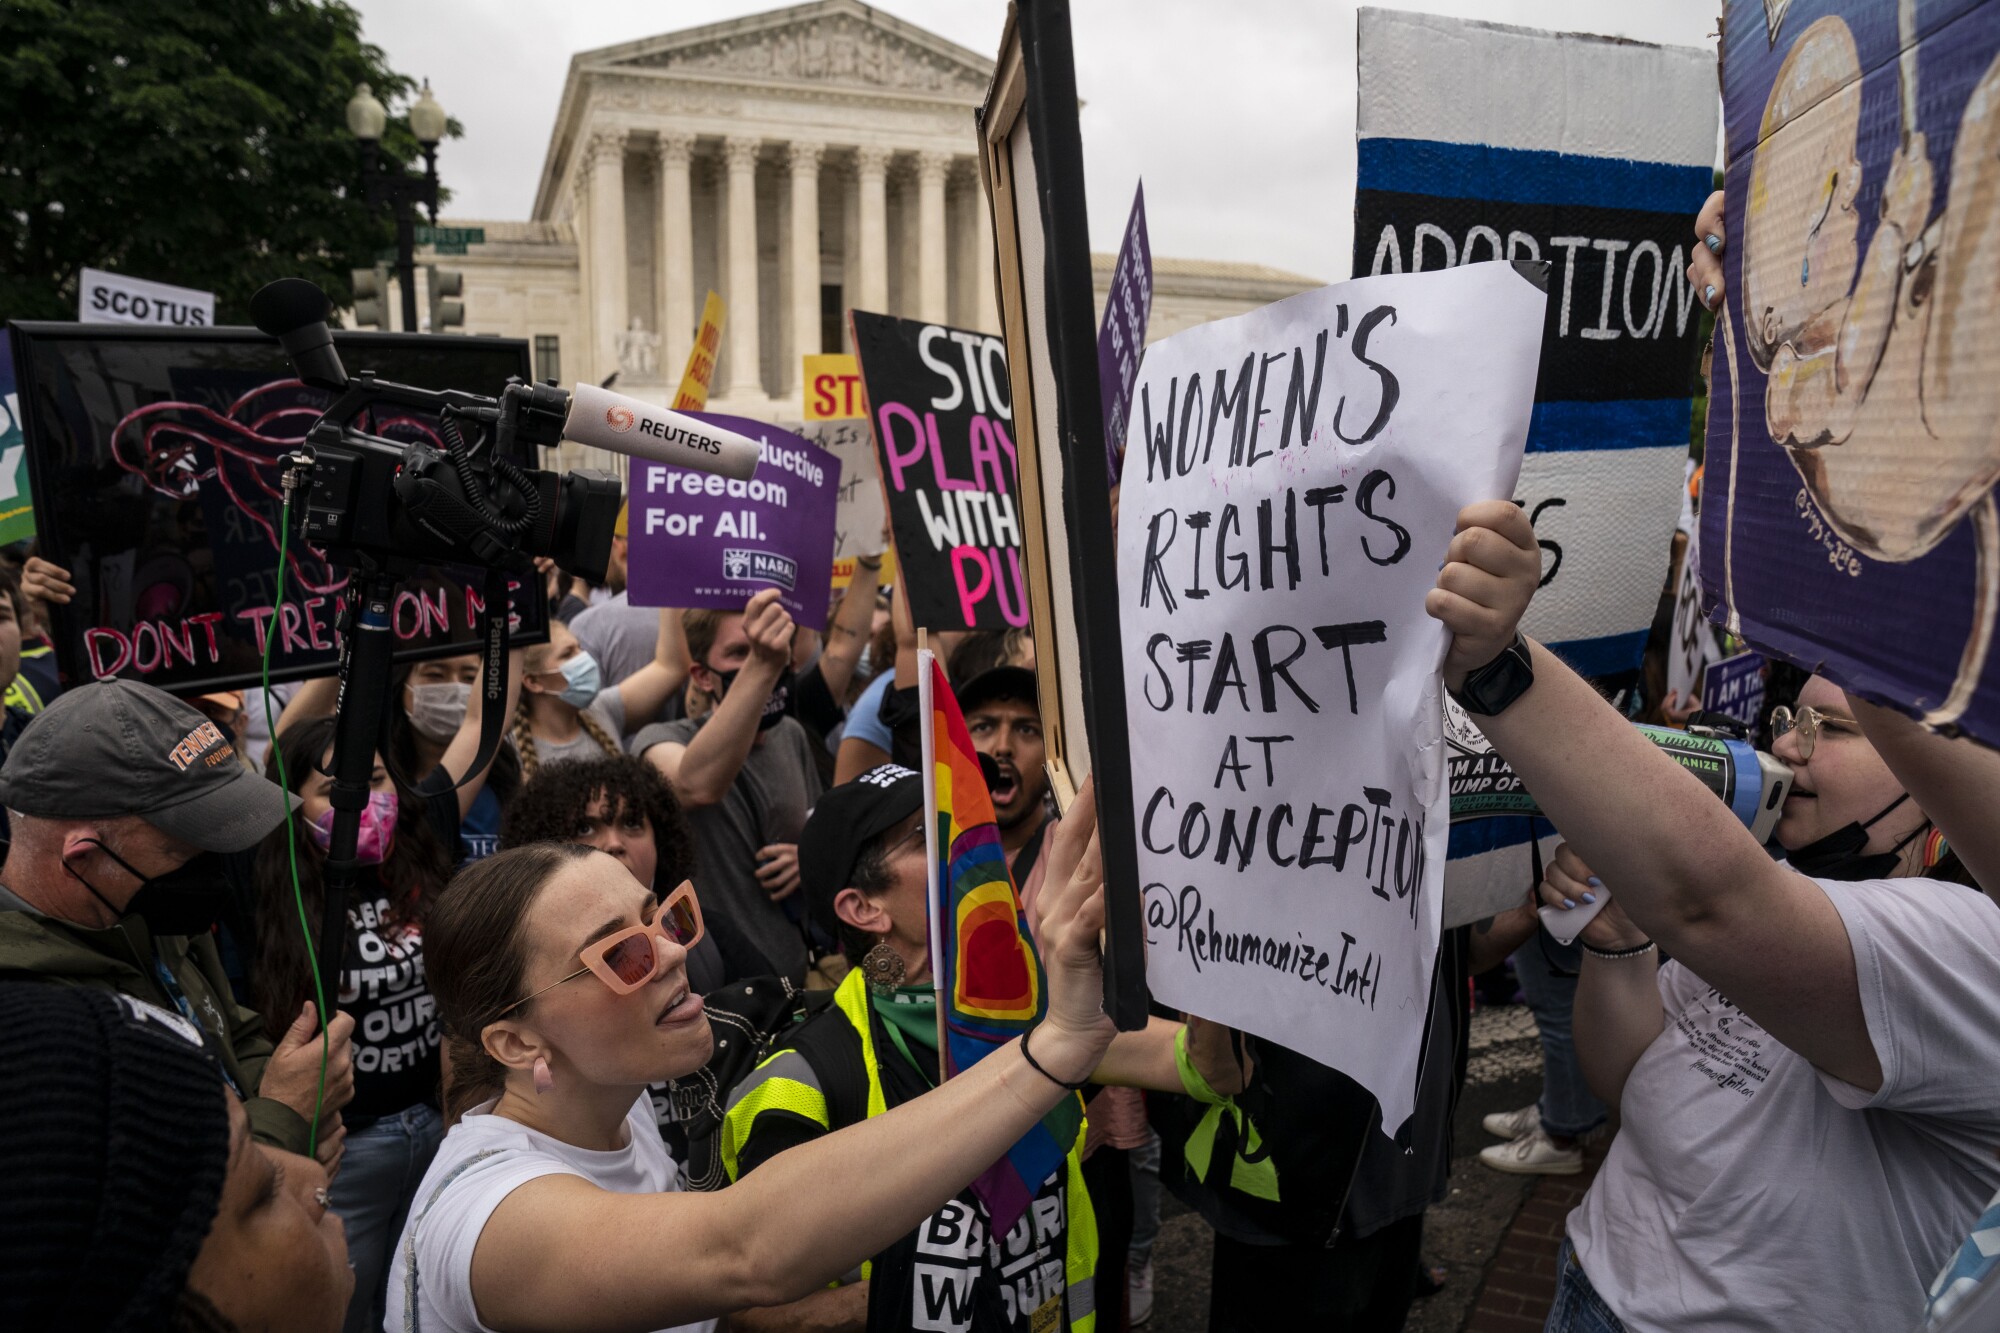 Abortion rights activists and antiabortion activists shout at one another at a rally.